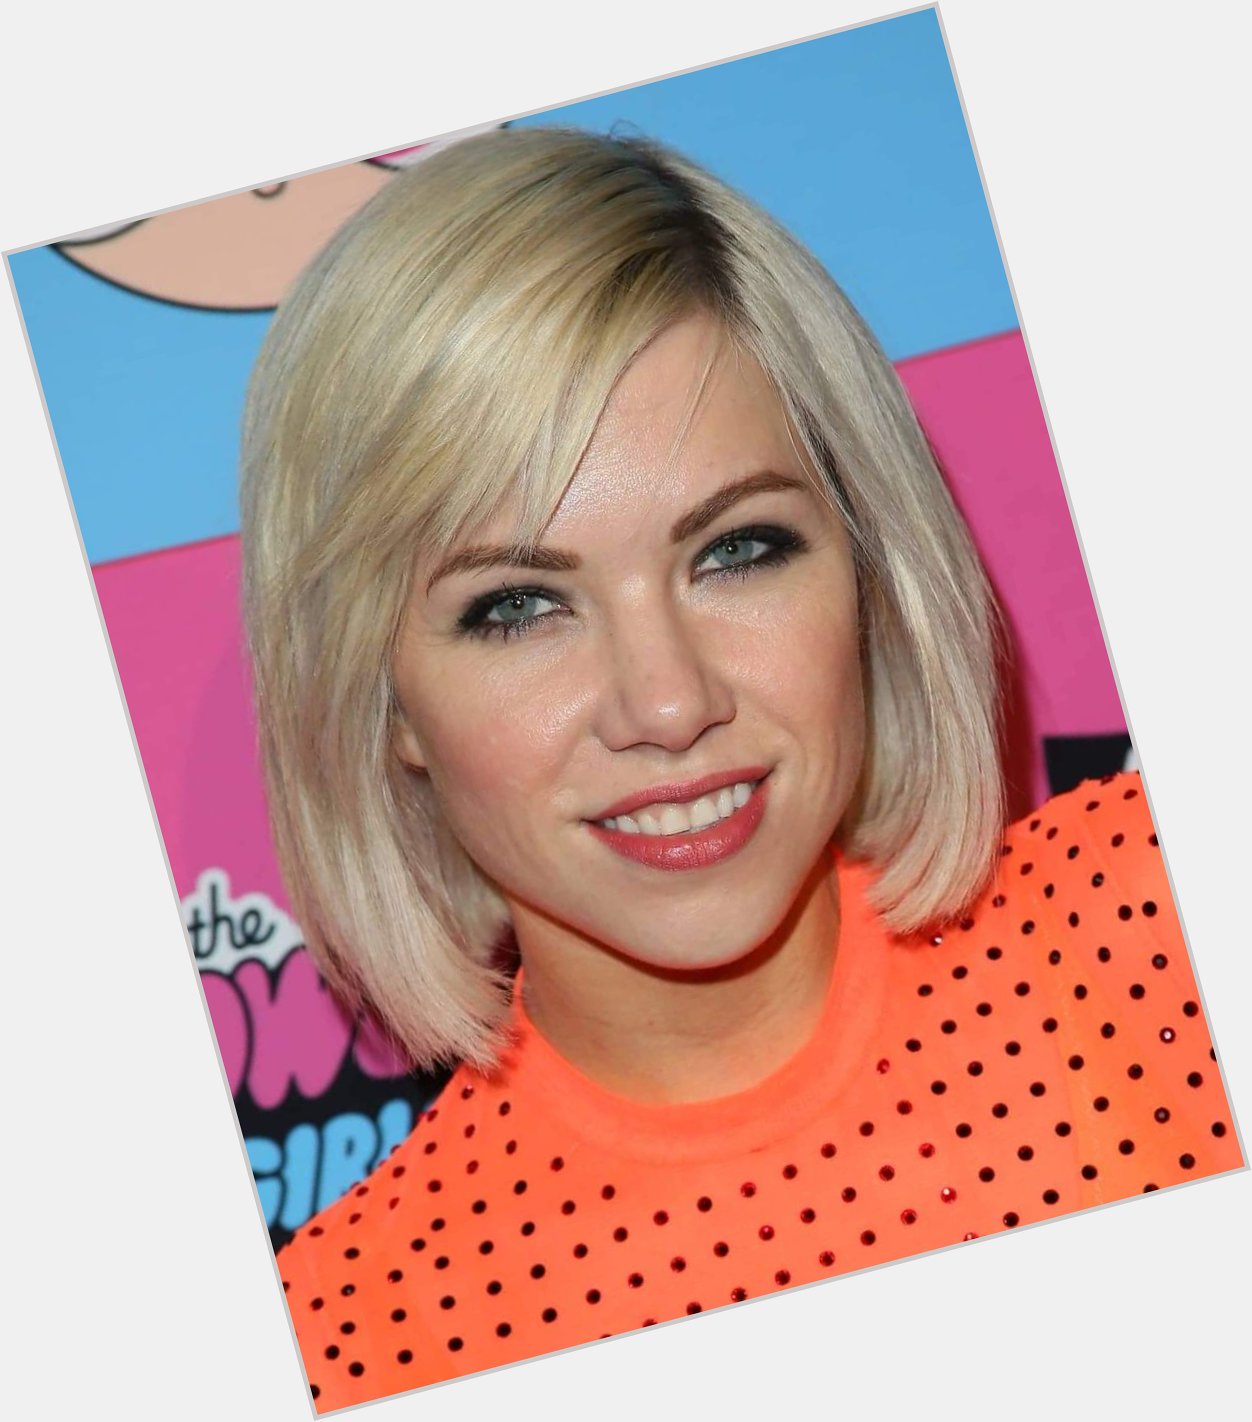 Happy Birthday Carly Rae Jepsen.  New Age 38. My best Wishes for you.  Greetings from Germany  